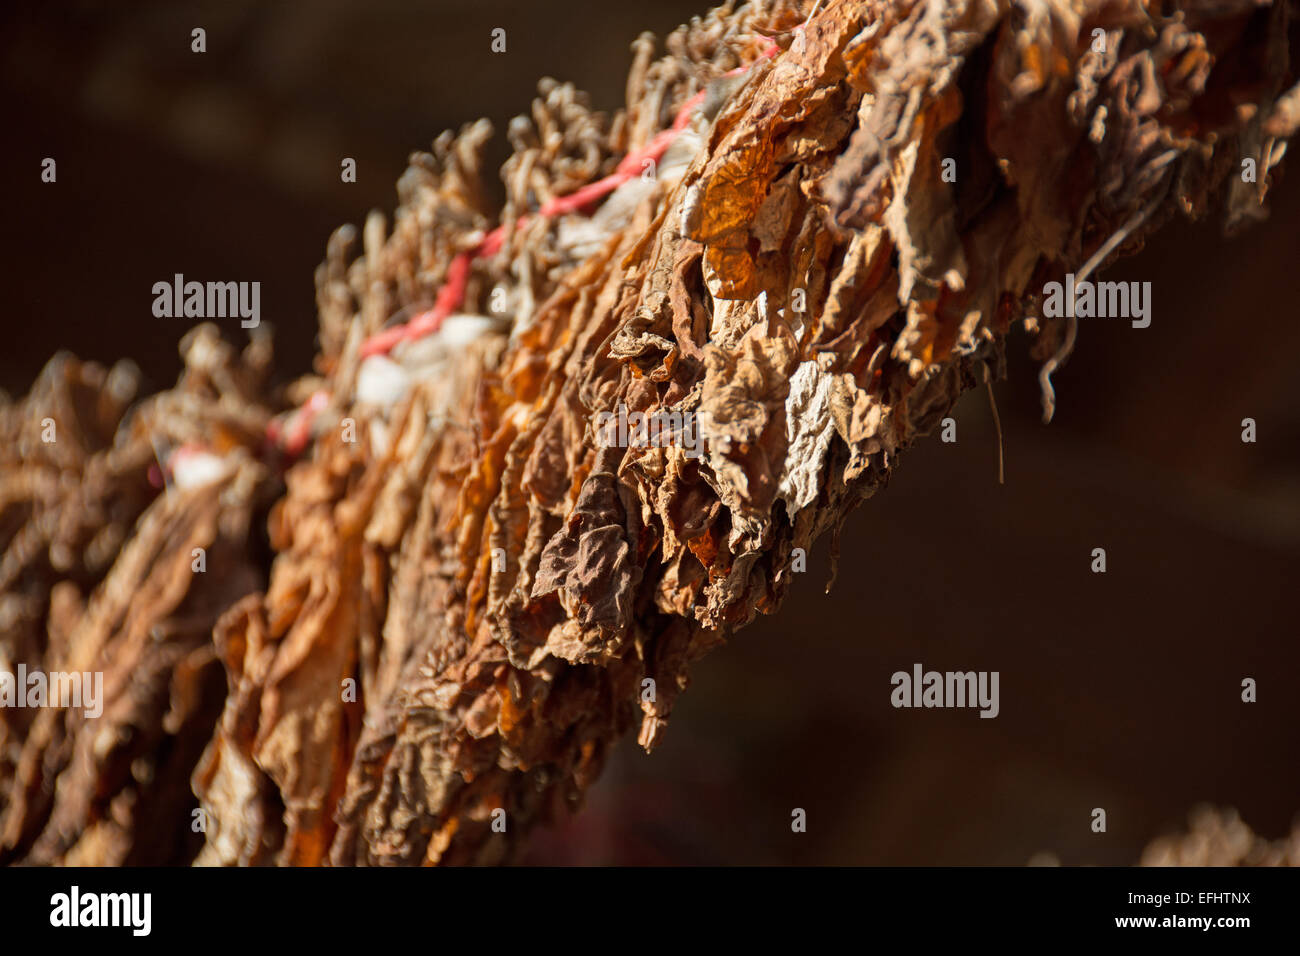 DOMINICAN REPUBLIC. Tobacco leaves drying. The leaves will be used to produce cigars. Stock Photo